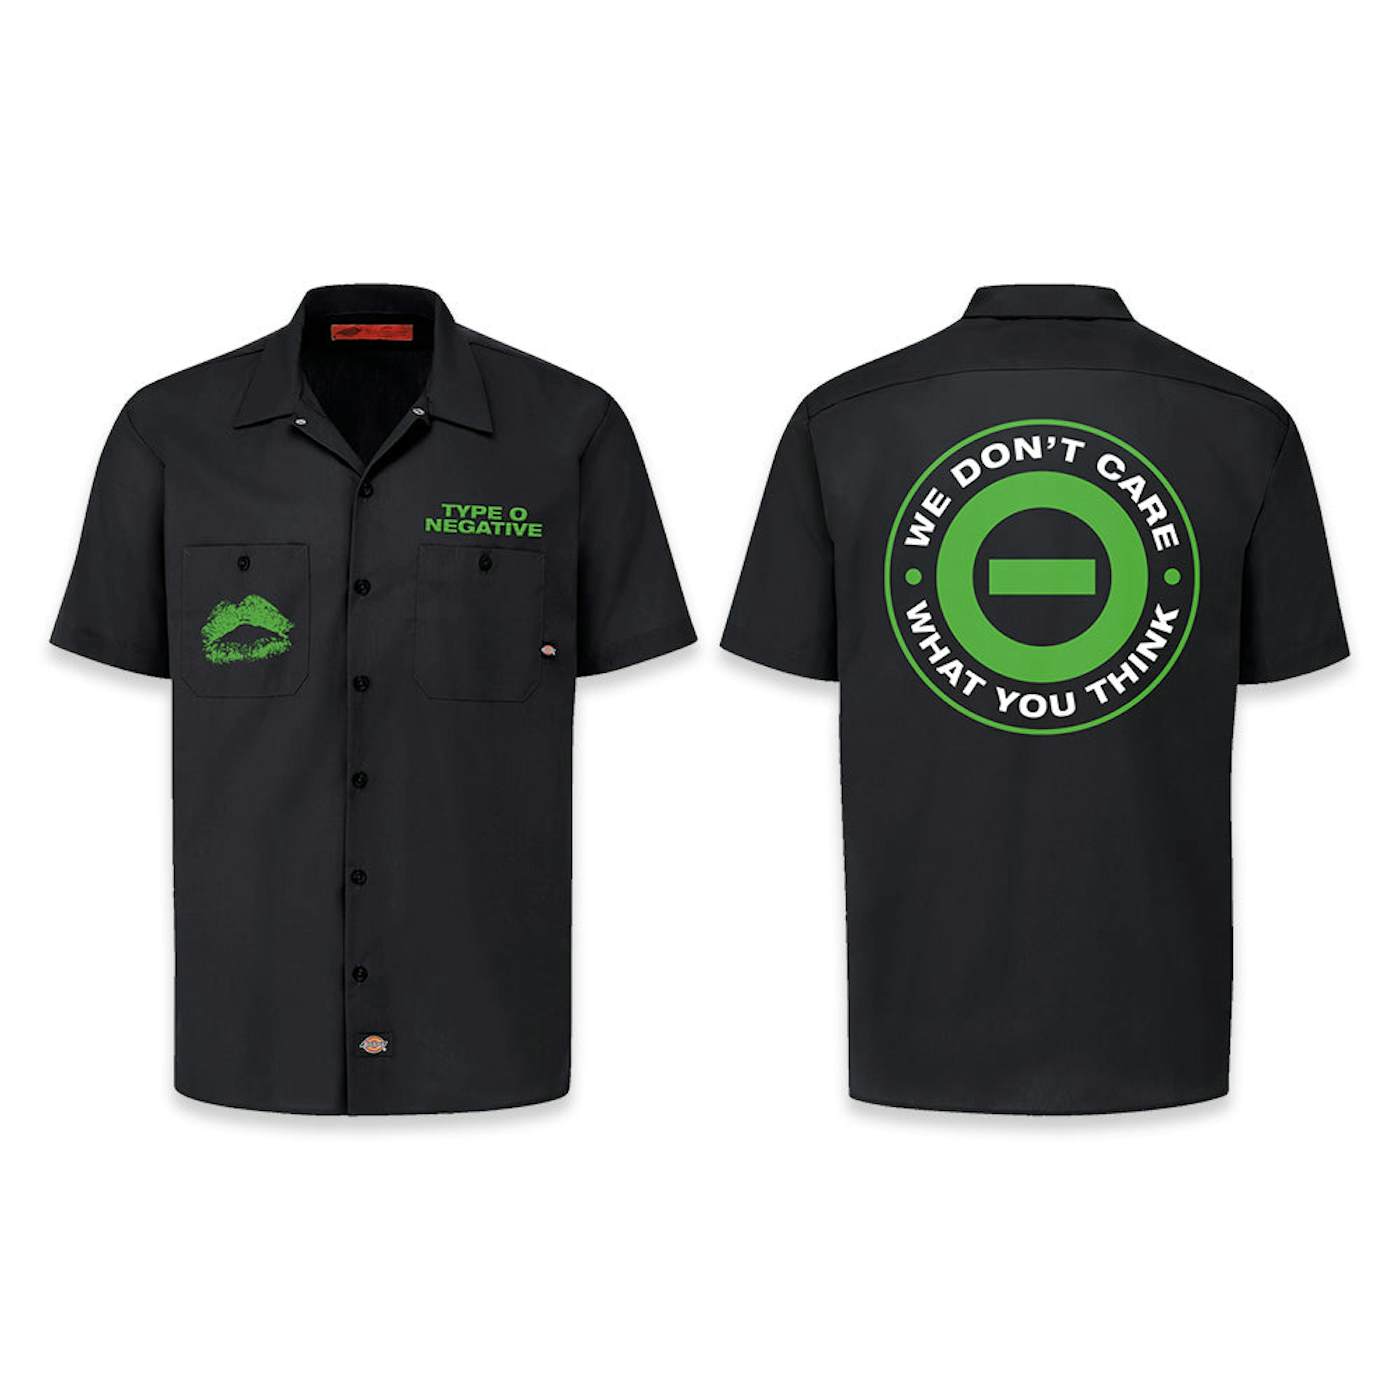 Type O Negative We Don't Care Work Shirt